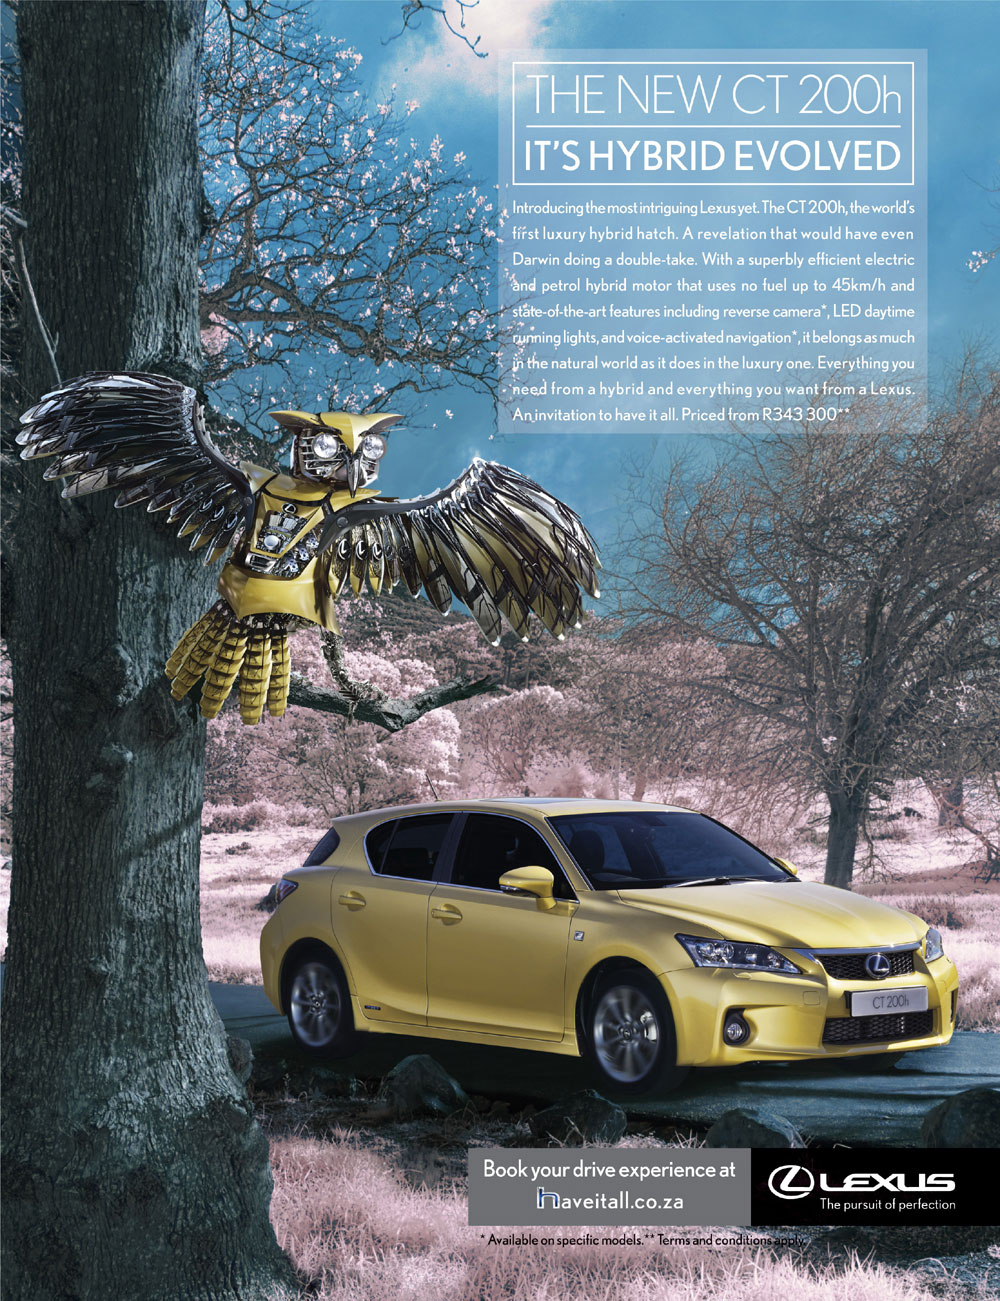 Surreal world, creatures created to launch Lexus Hybrid Hatchback